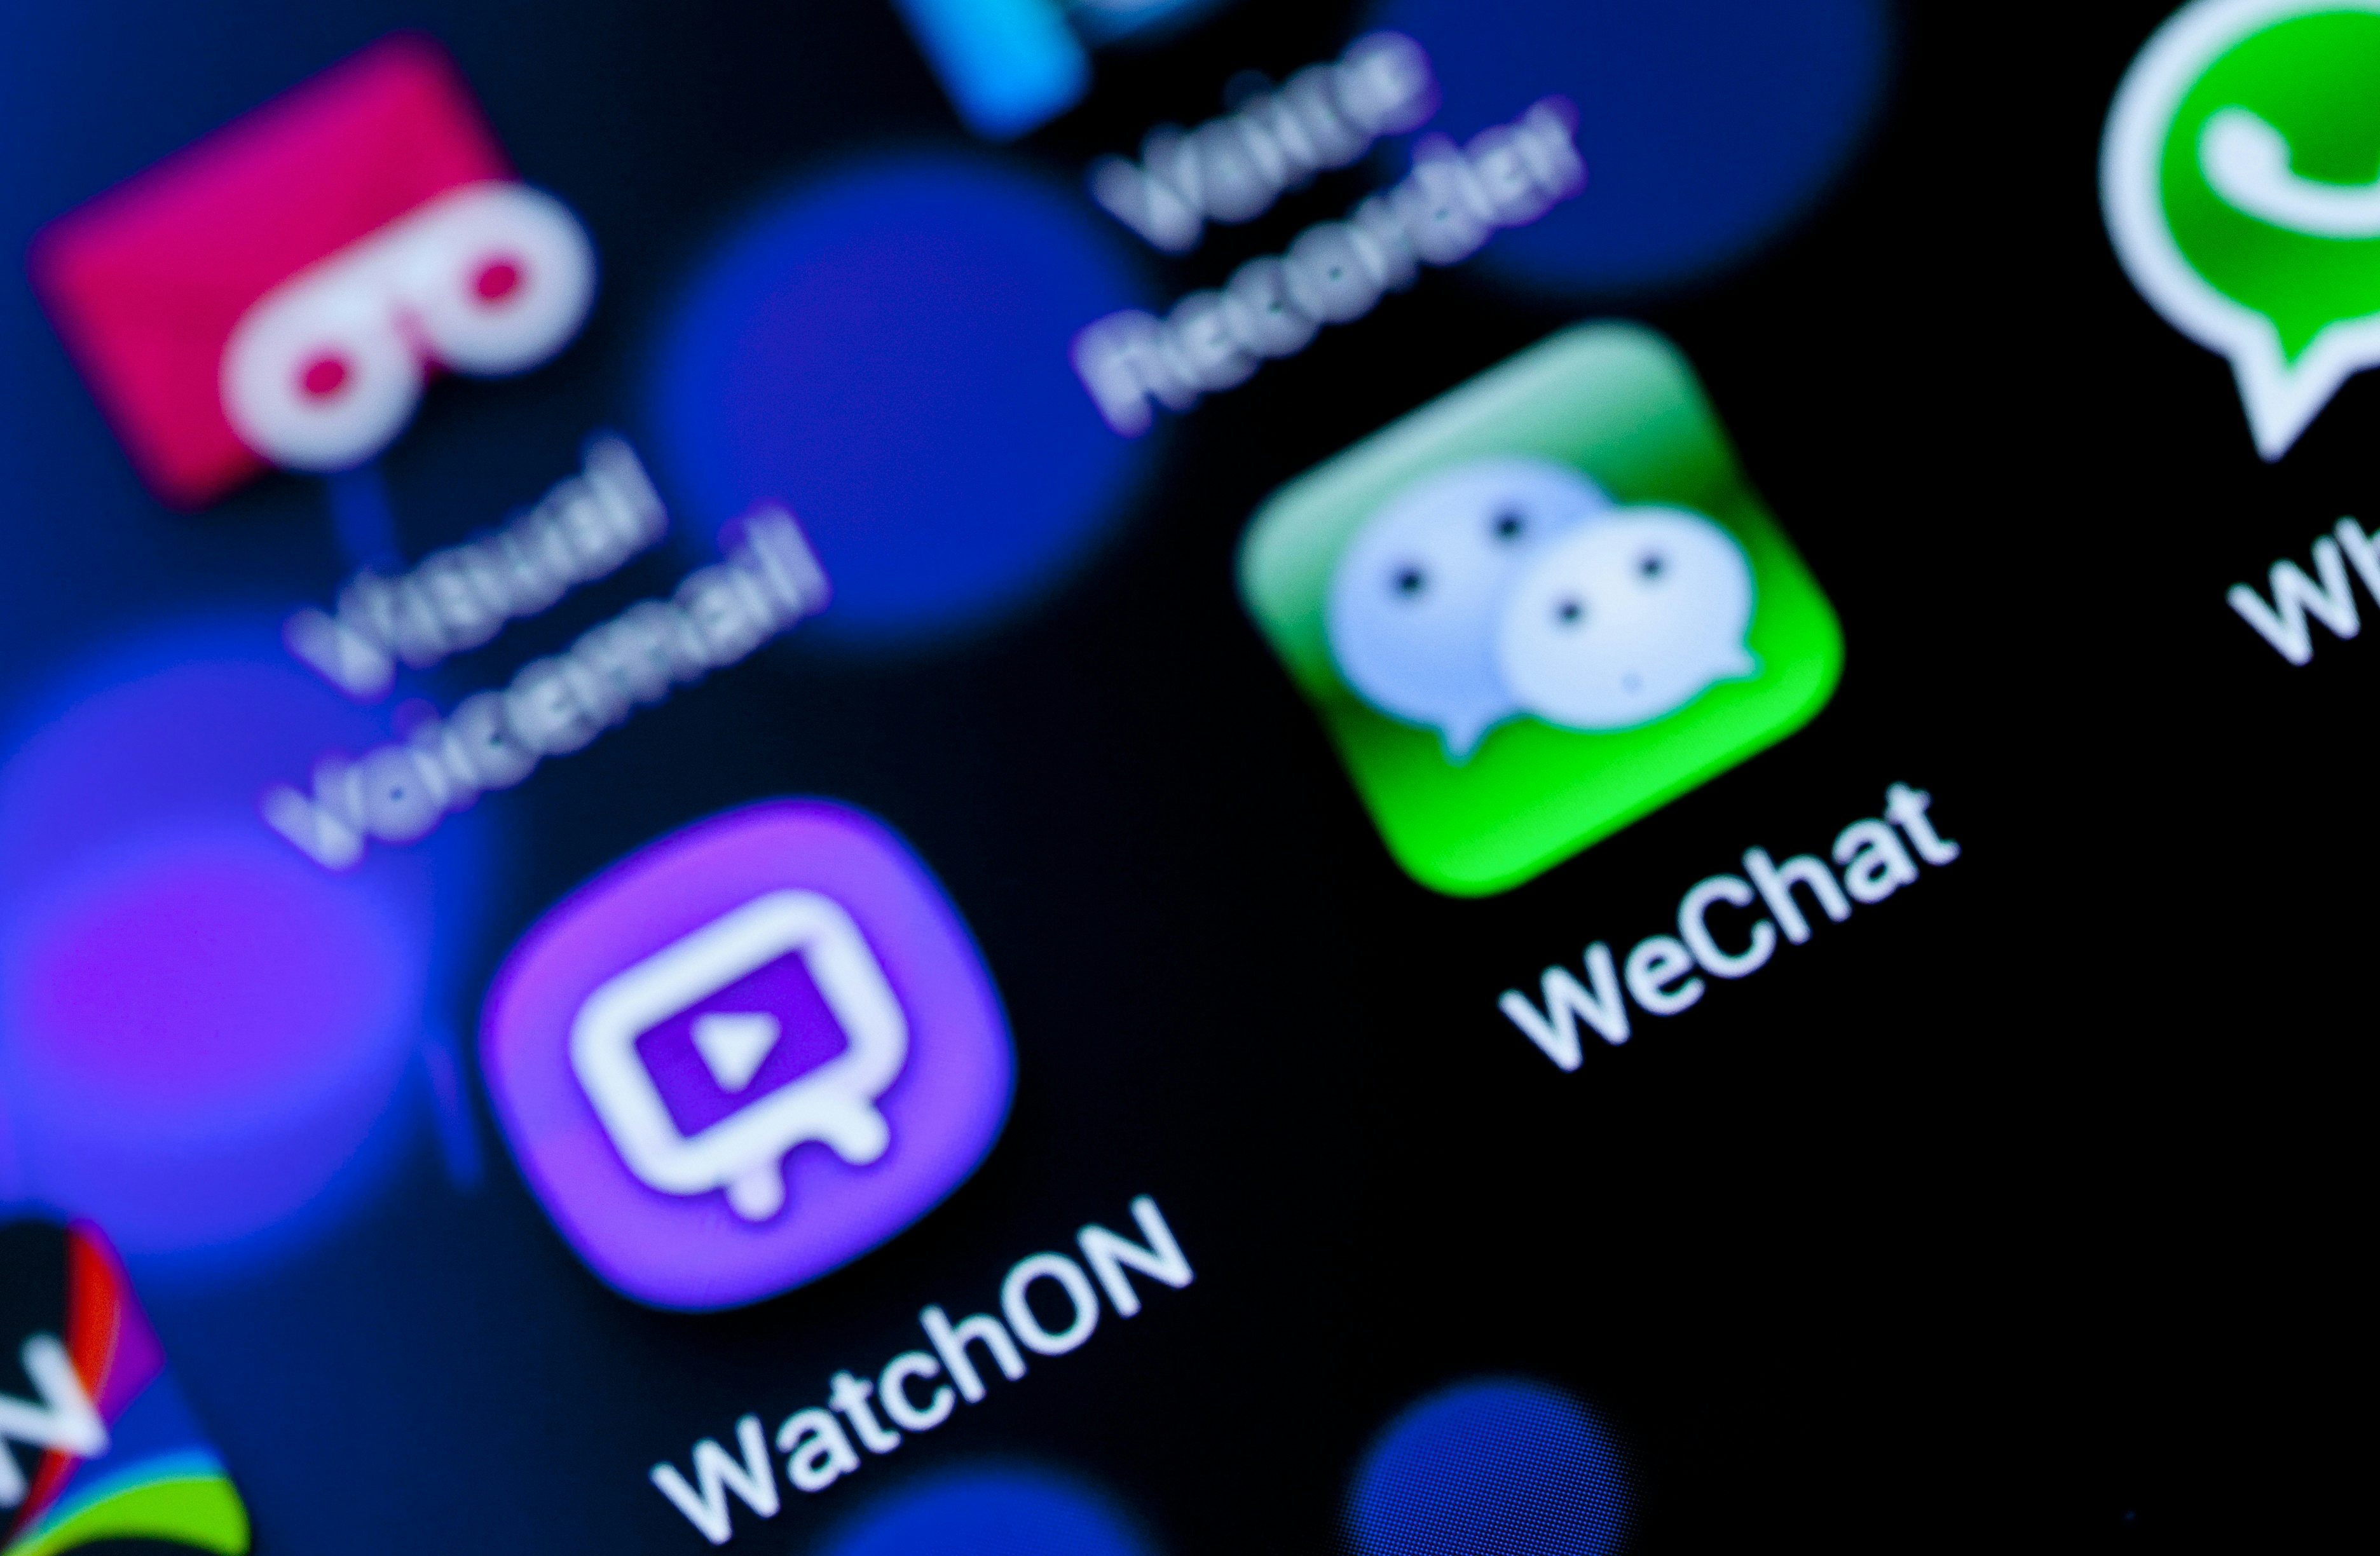 WeChat's new innovation is aimed to cut down on the need to download standalone mobile apps. (Shutterstock)